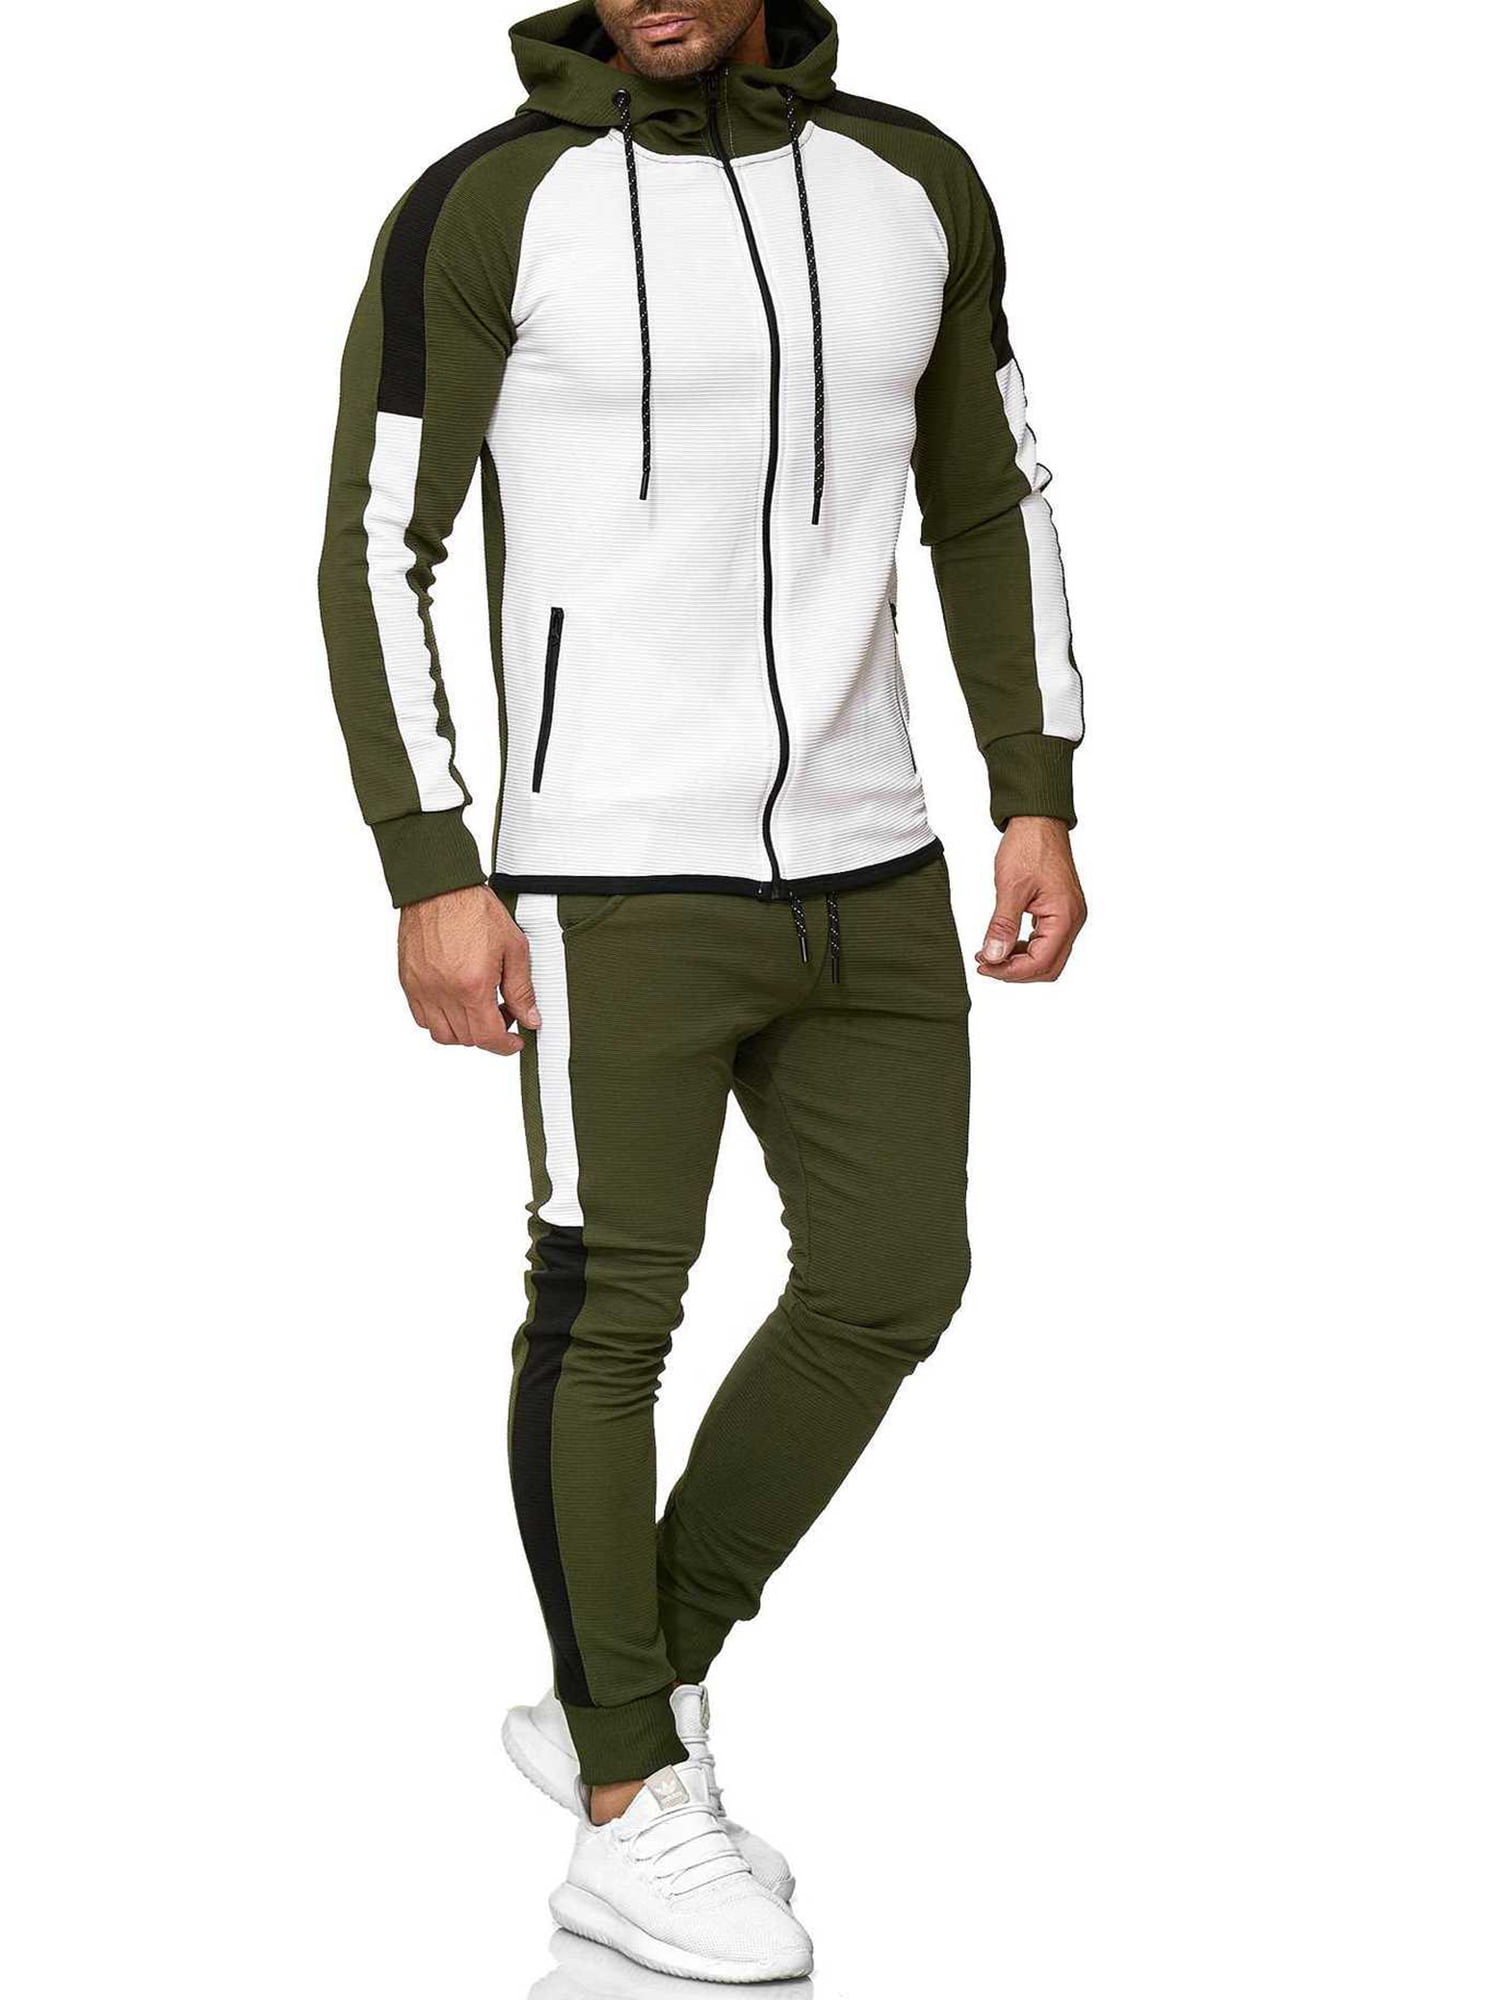 Mens 2 Pieces Patchwork Outfit Set Long Sleeve Full Zip Hooded Pullover Sweater and Long Pants Set Gym Tracksuit Running Set Hip Hop Sports Clothing Set